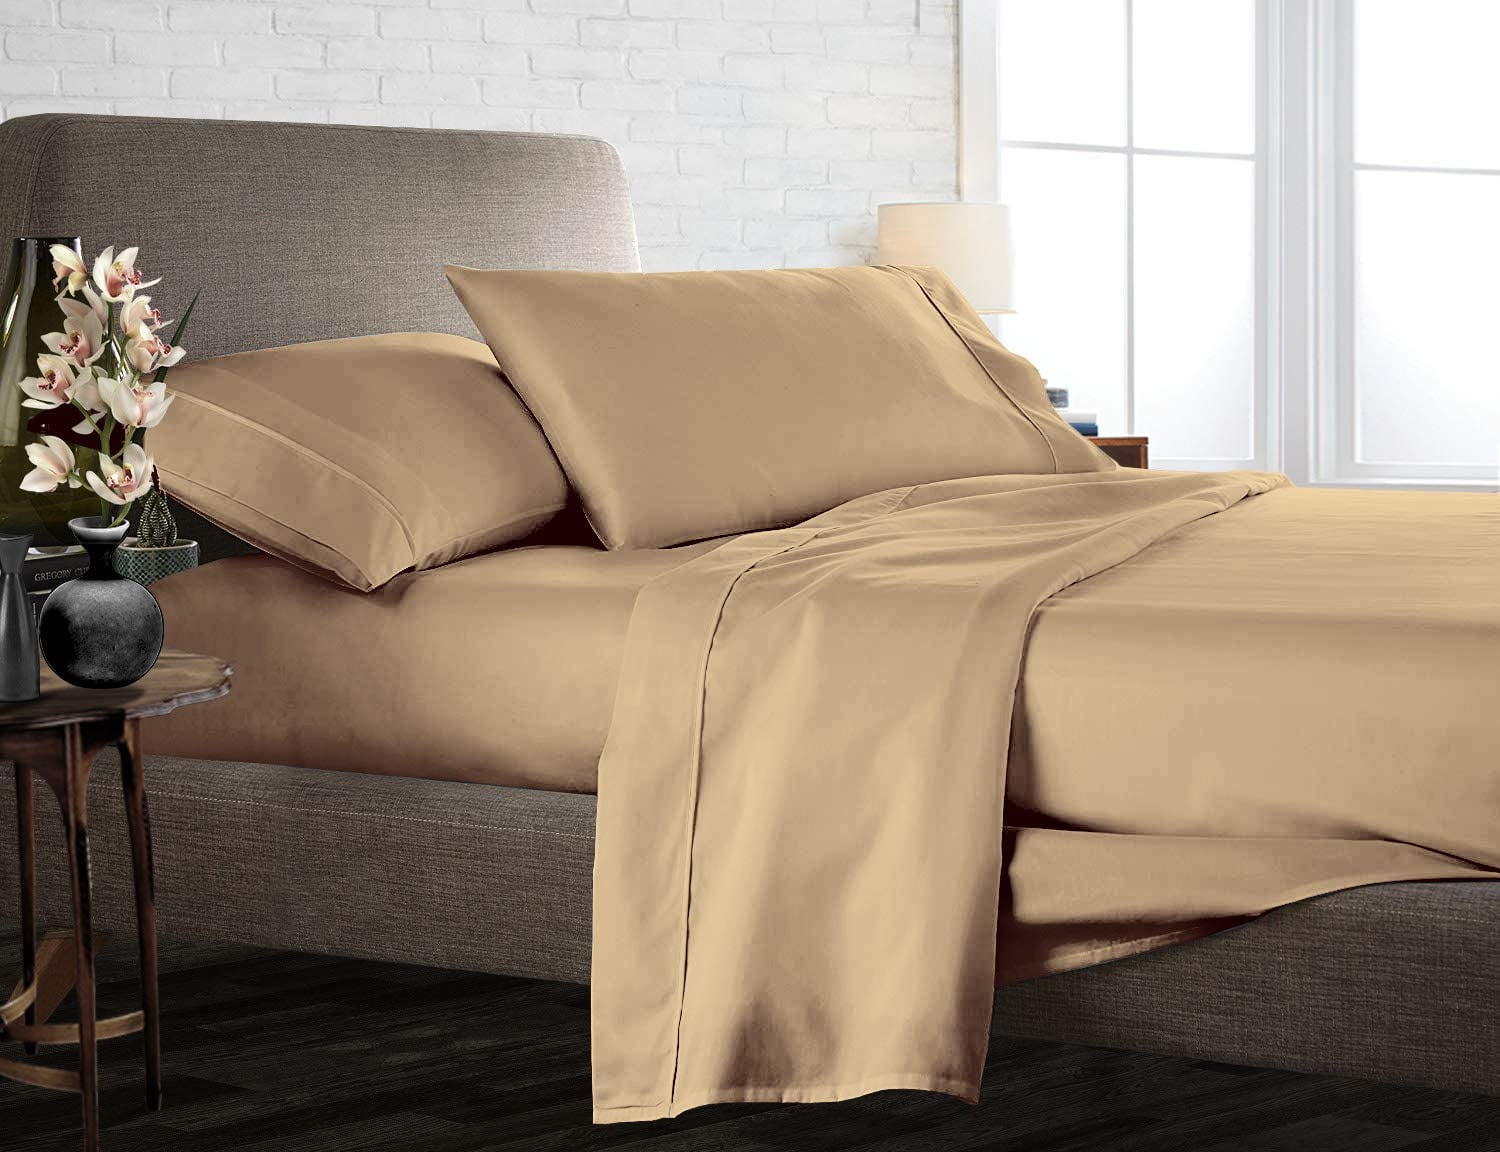 39x75 Inches Stretches Up to 16 Inches Deep Pocket Fitted Sheet + 16 Deep Twin: 800 Thread Count Super Soft Satin Bedding Fitted Sheet- Luxury Standard 100% Long-Staple Cotton 